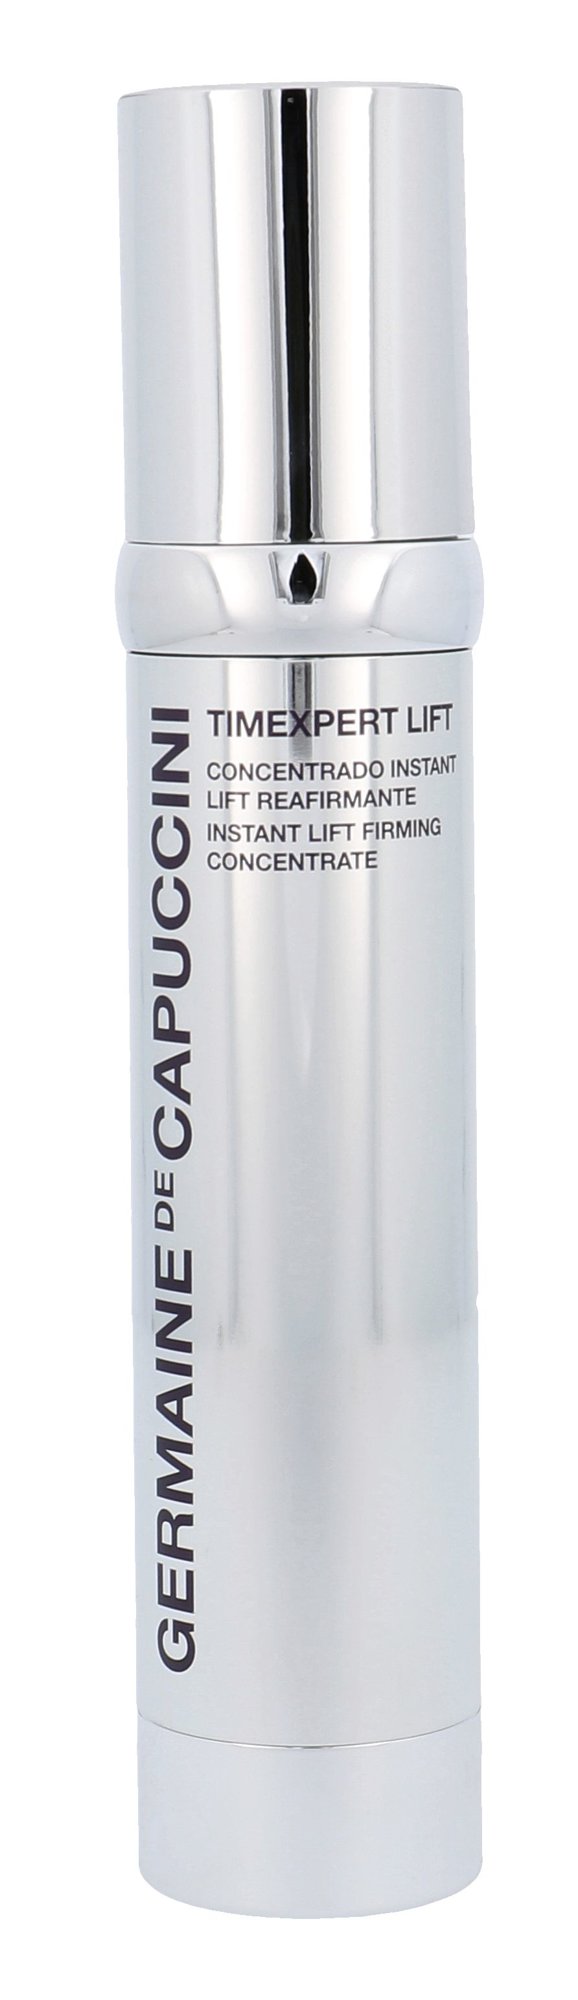 Germaine de Capuccini Timexpert Lift Instant Lift Firming Concentrate